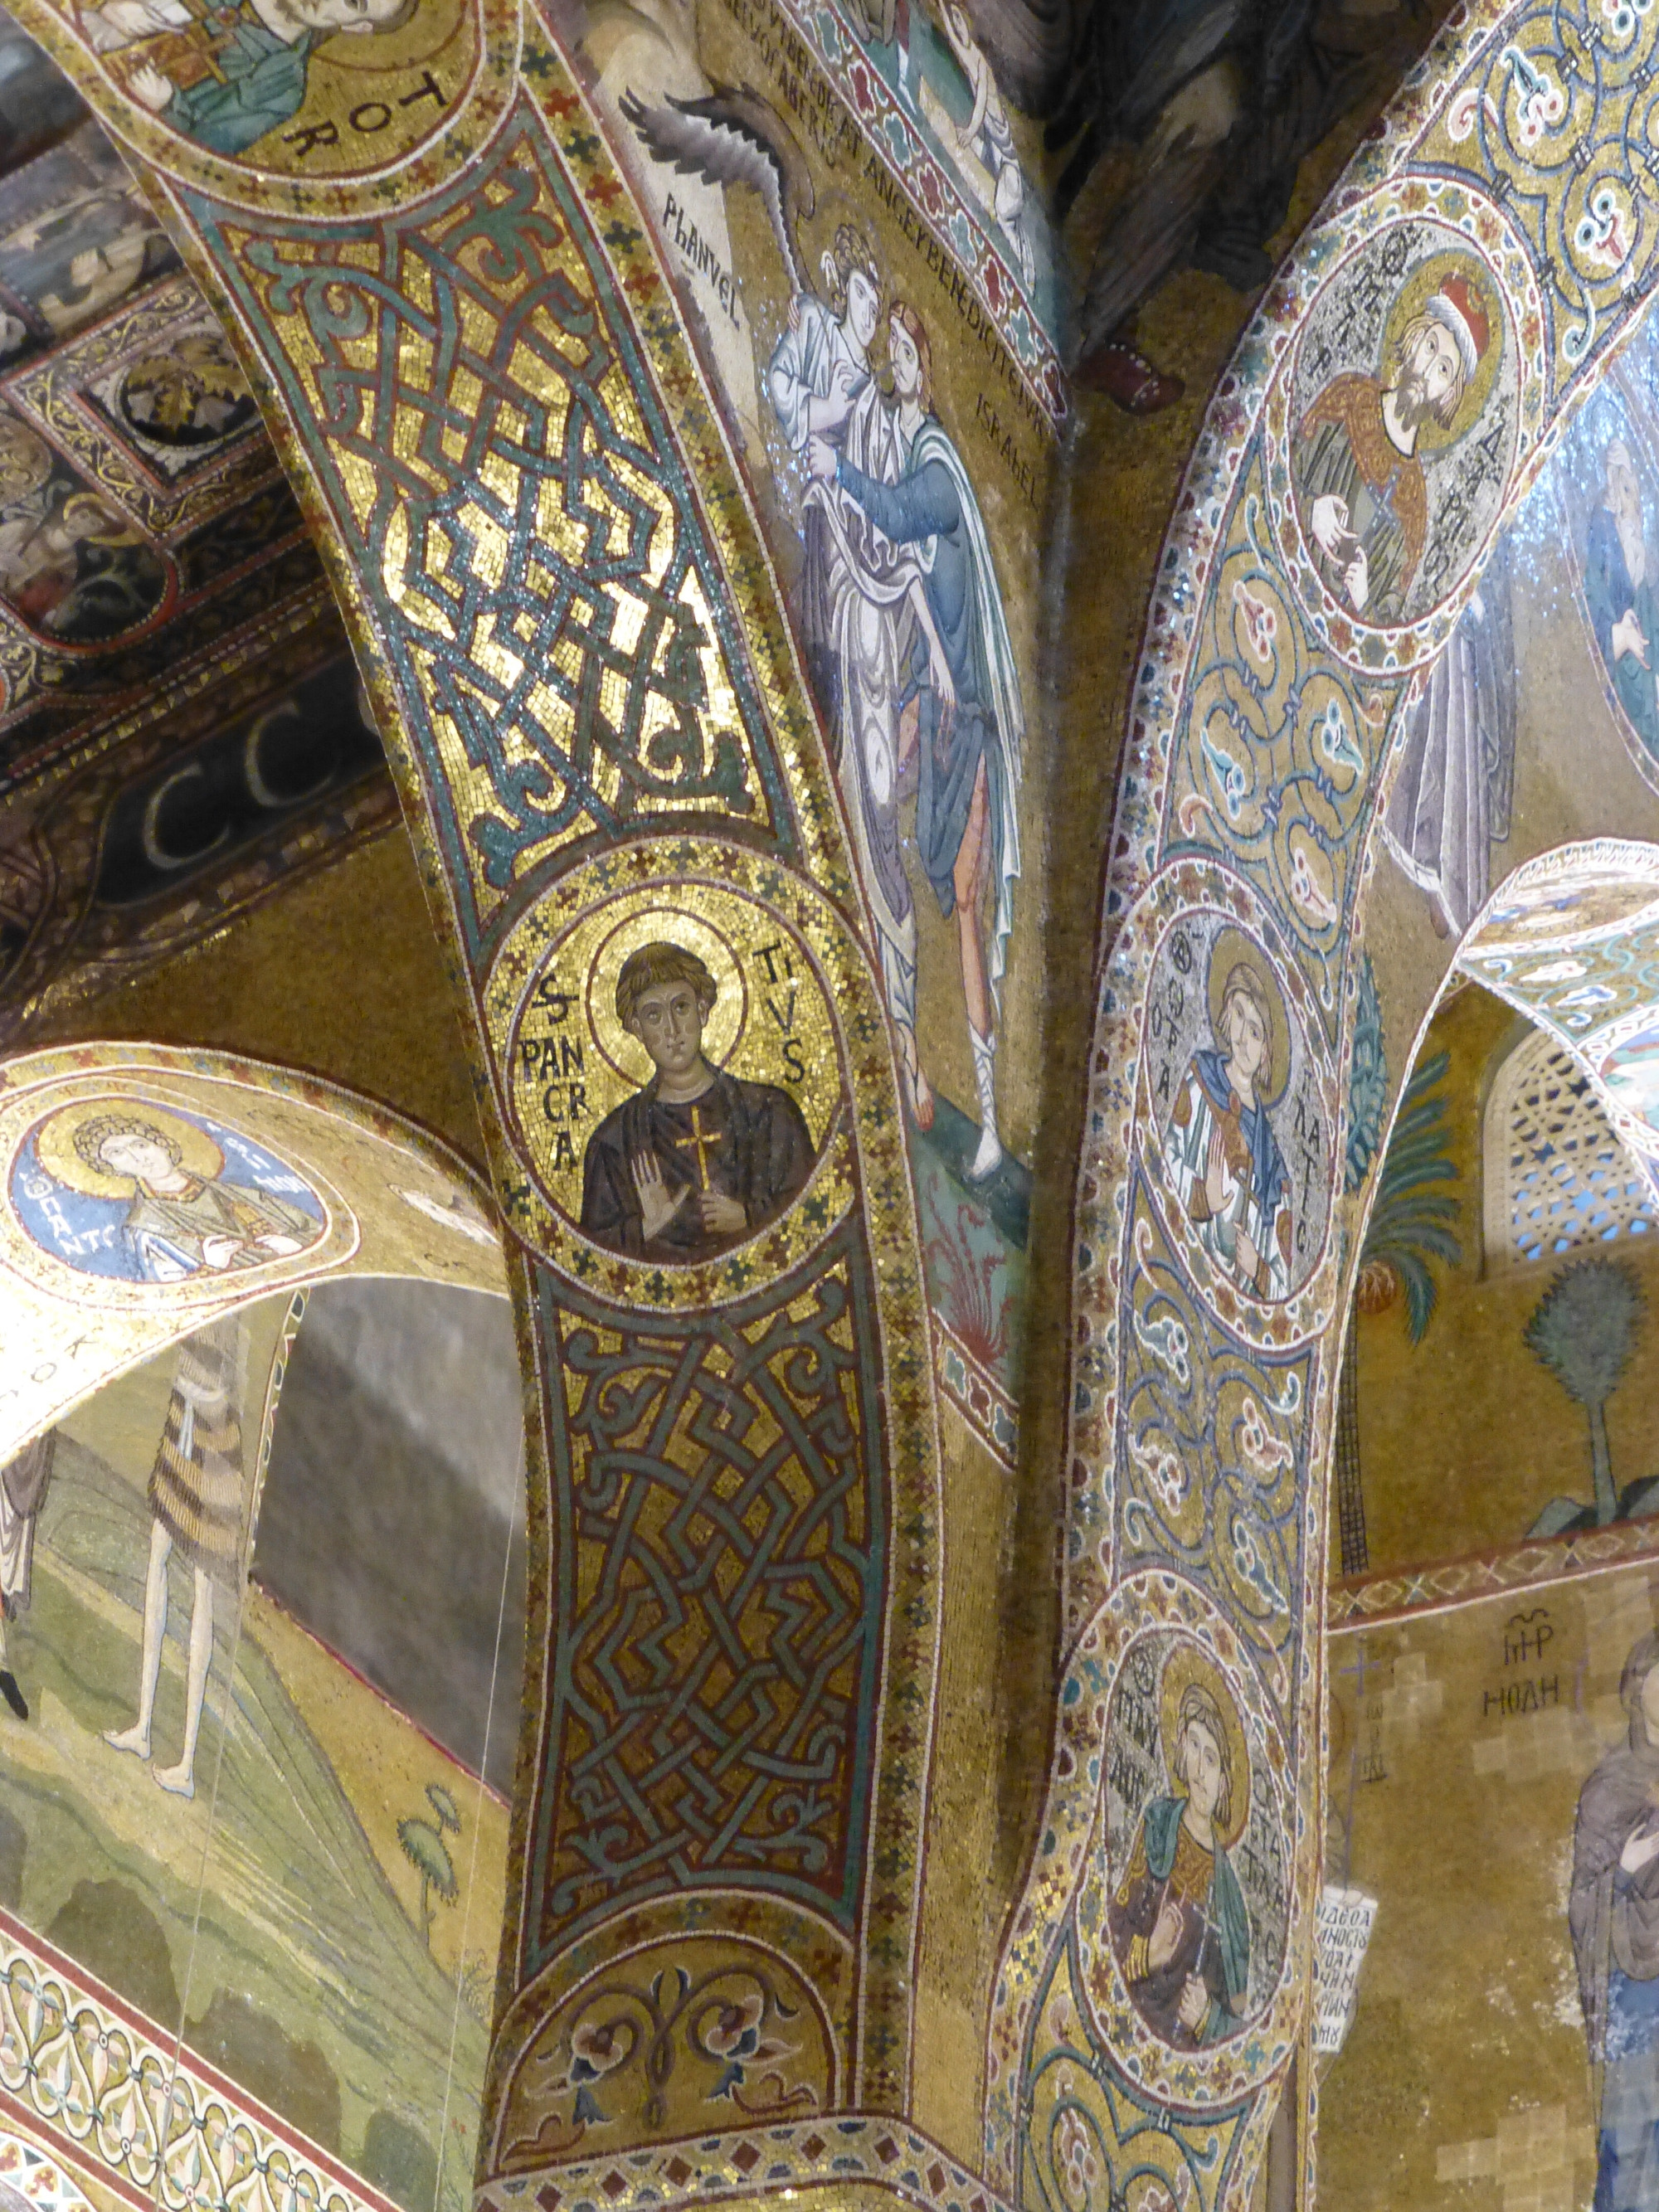 Cappella Palatina, Palermo, 1140s. Mosaics on soffits of the north arcades showing knot motifs and intertwined medallions.